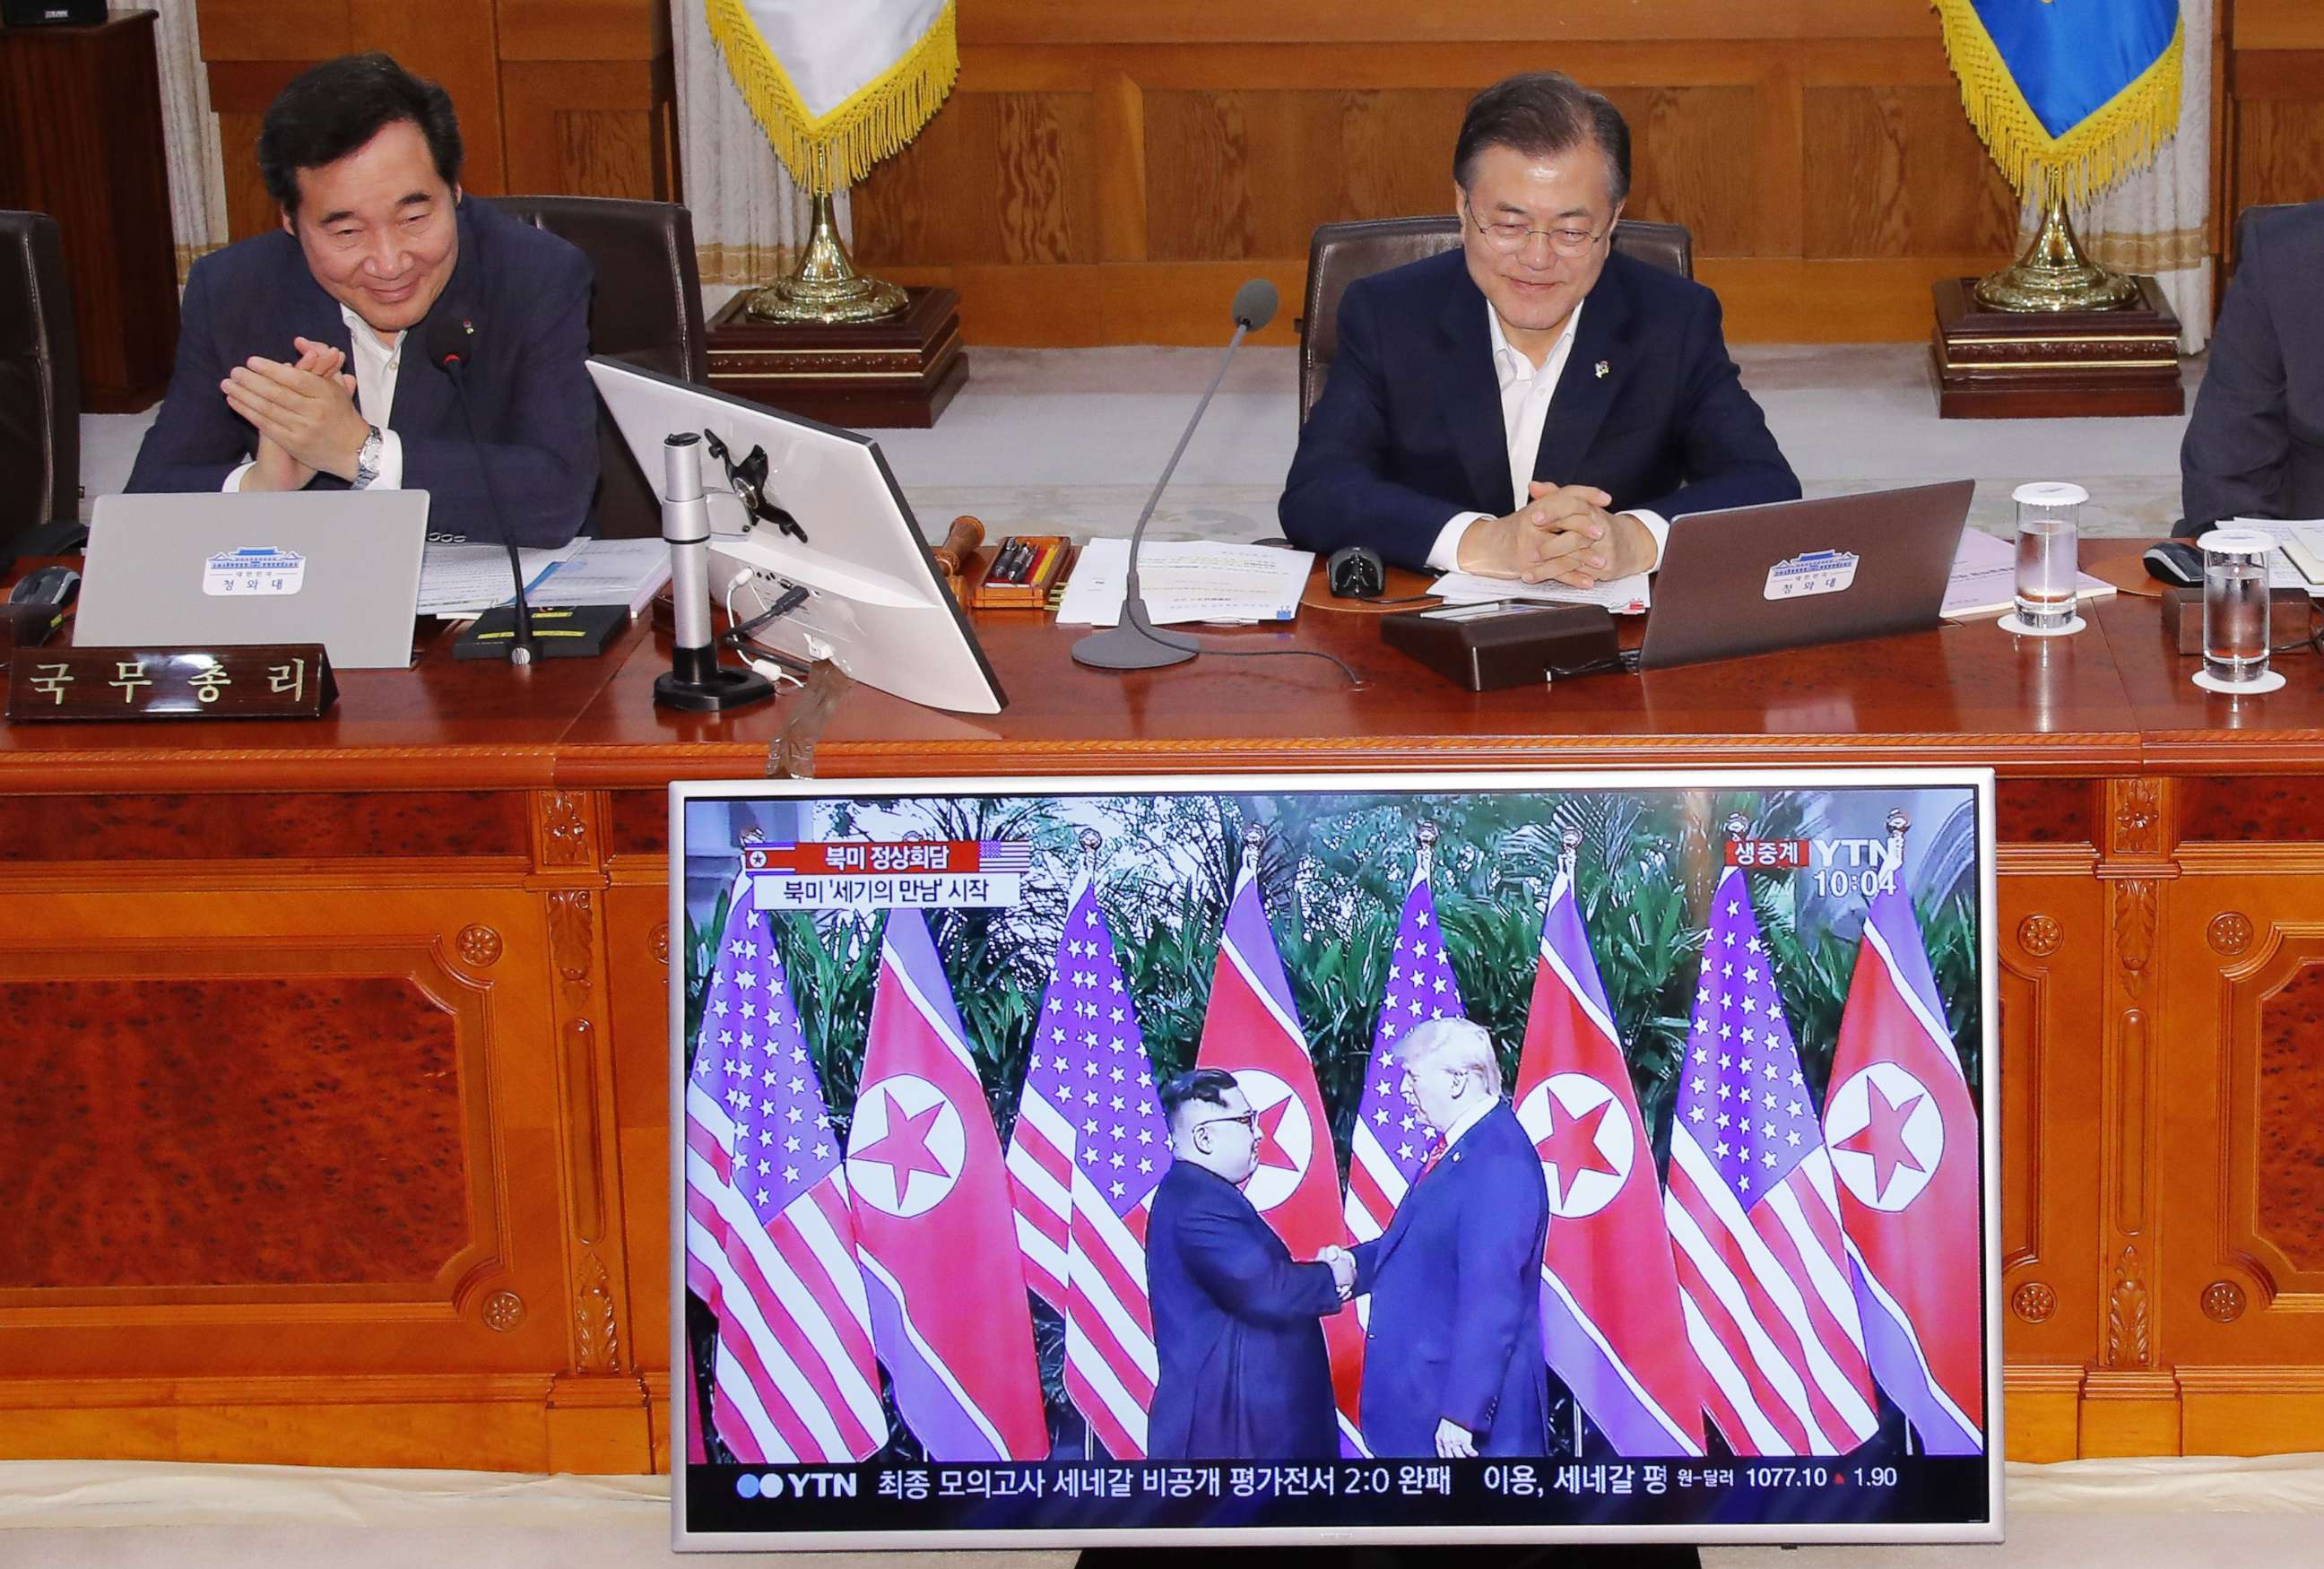 PHOTO: South Korean Prime Minister Lee Nak-yon and President Moon Jae-in watch a television screen showing the summit between President Donald Trump and North Korean leader Kim Jong Un during a Cabinet meeting in Seoul on June 12, 2018.